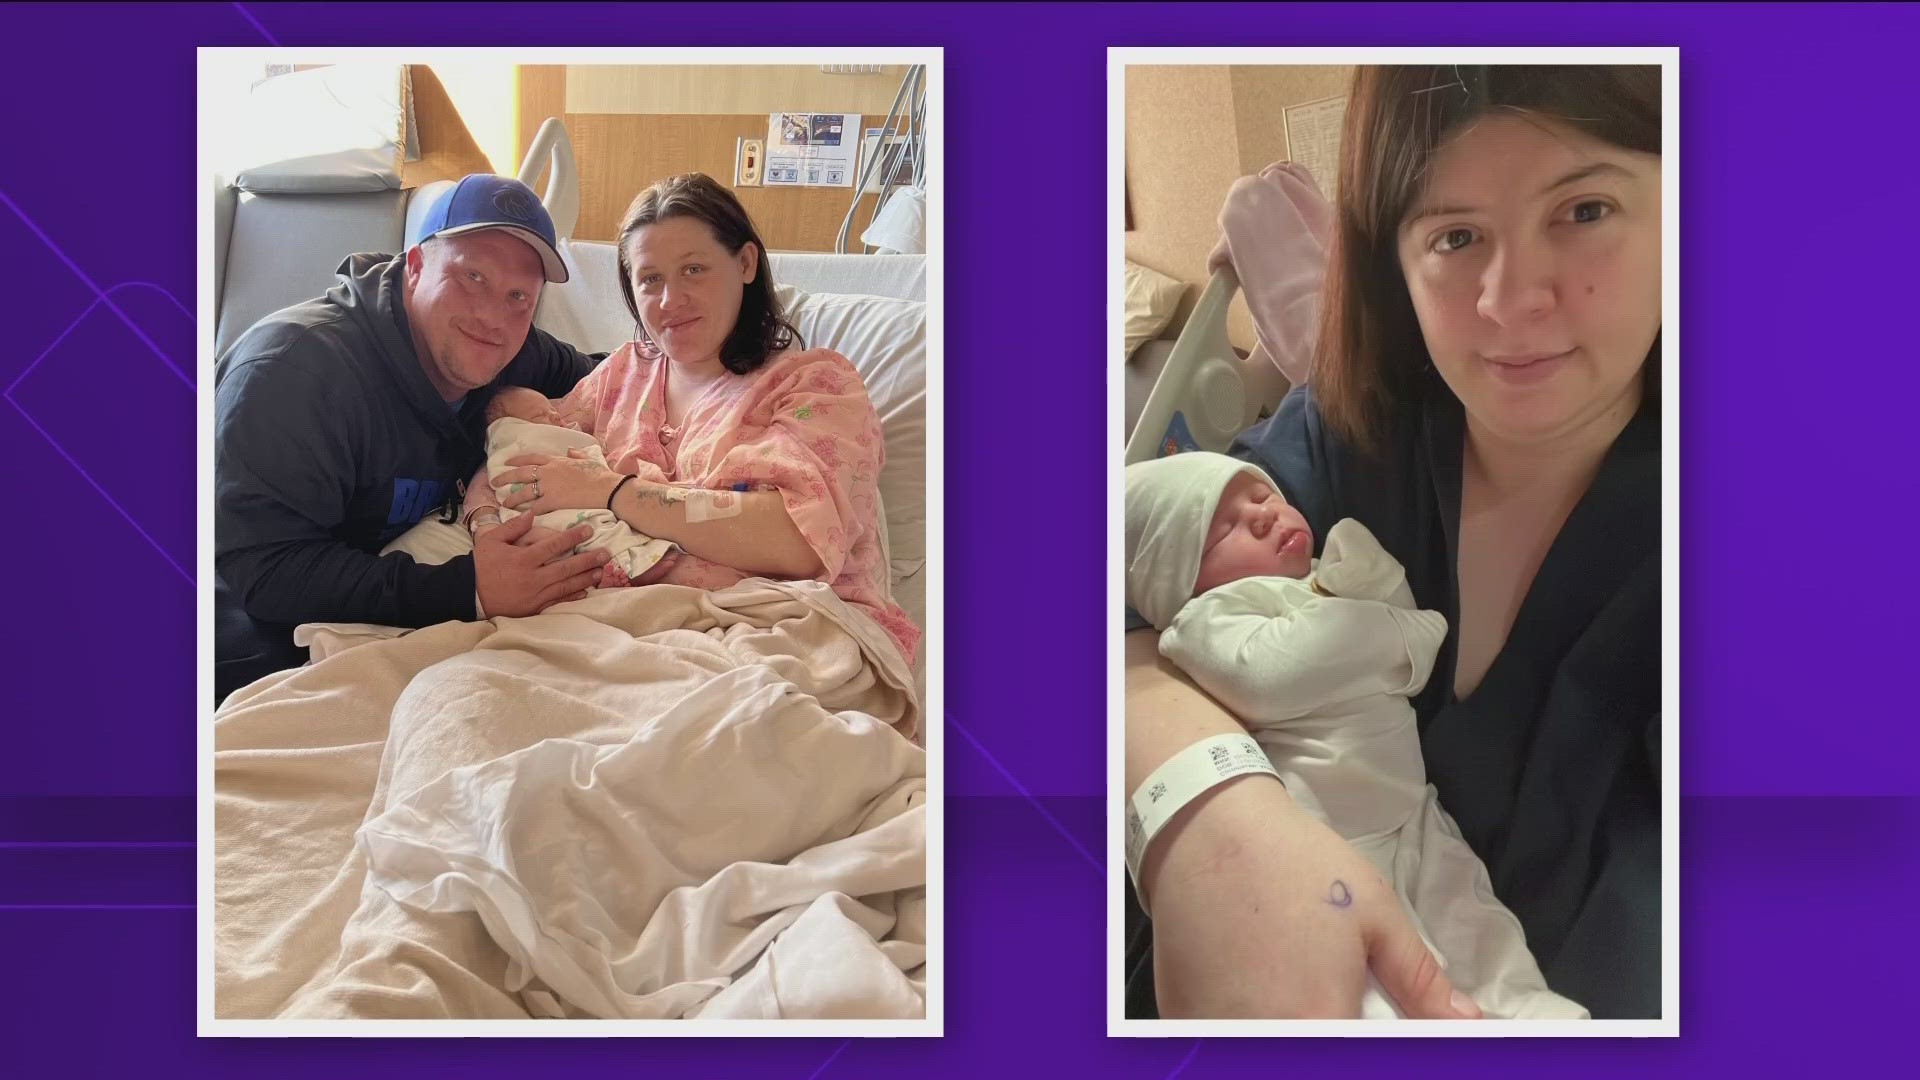 Both New Year babies are girls, and one was born in Boise and the other in Meridian at 12:32 a.m. at St. Luke Hospital.